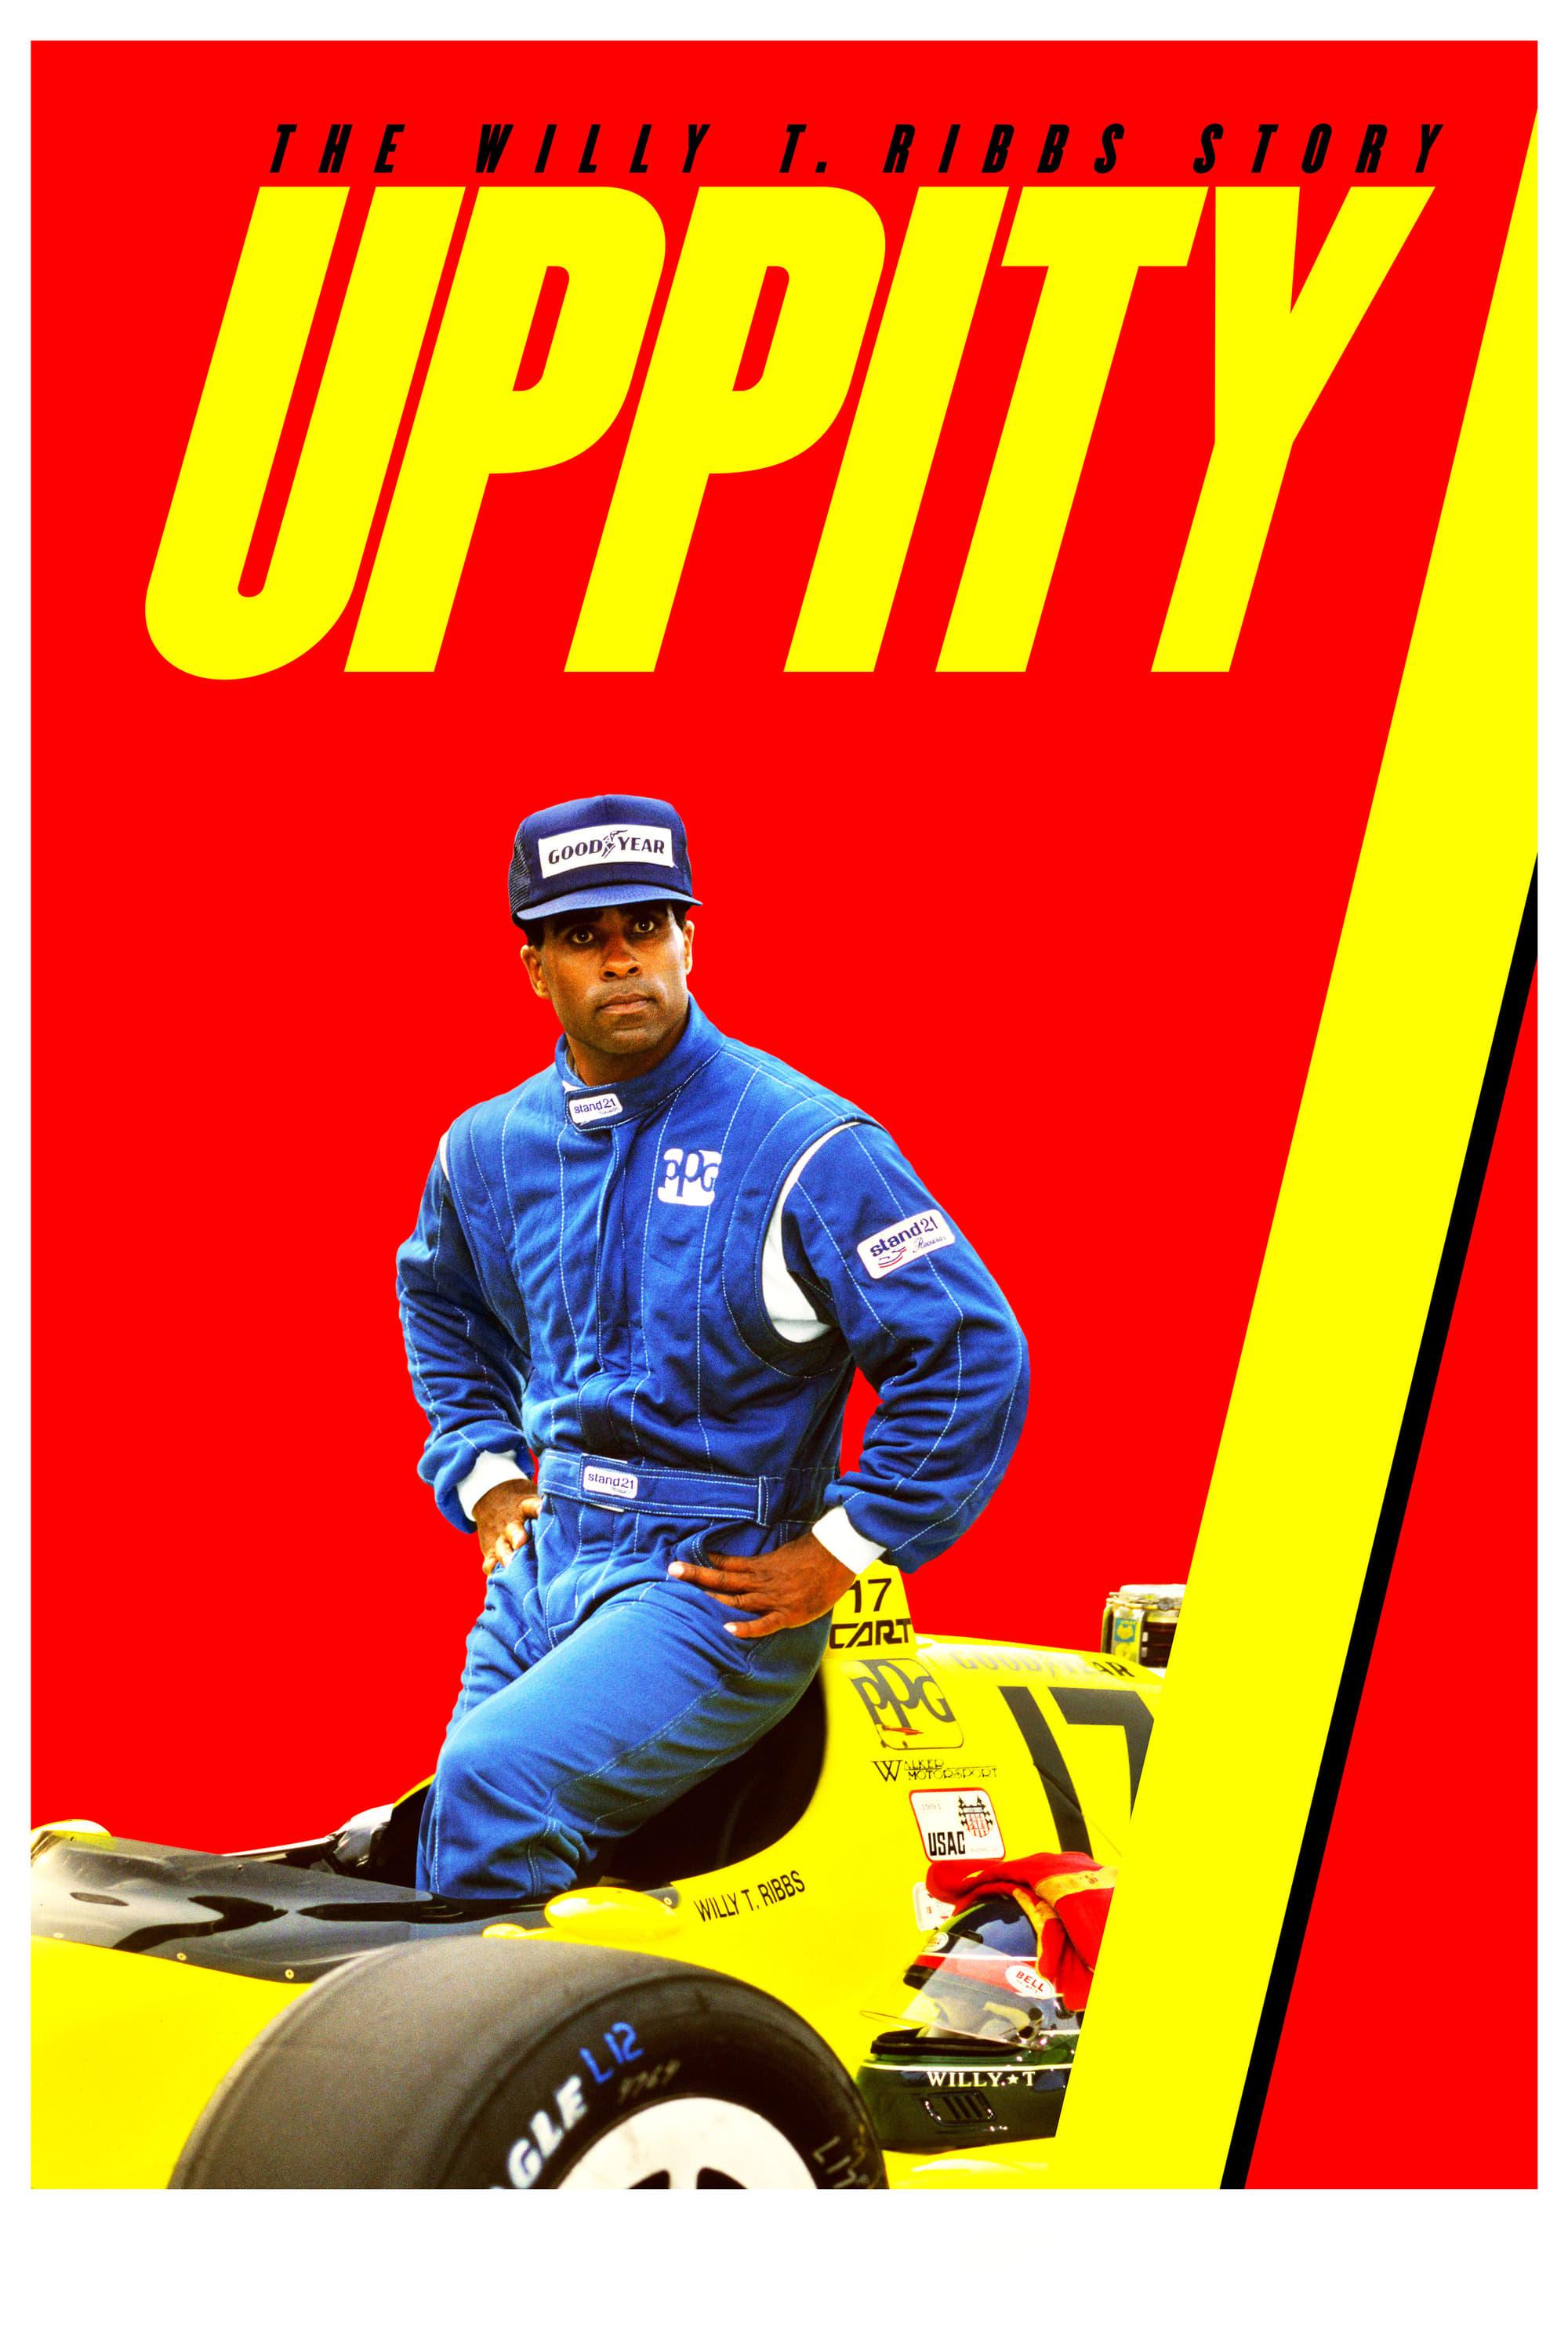 Uppity: The Willy T. Ribbs Story poster